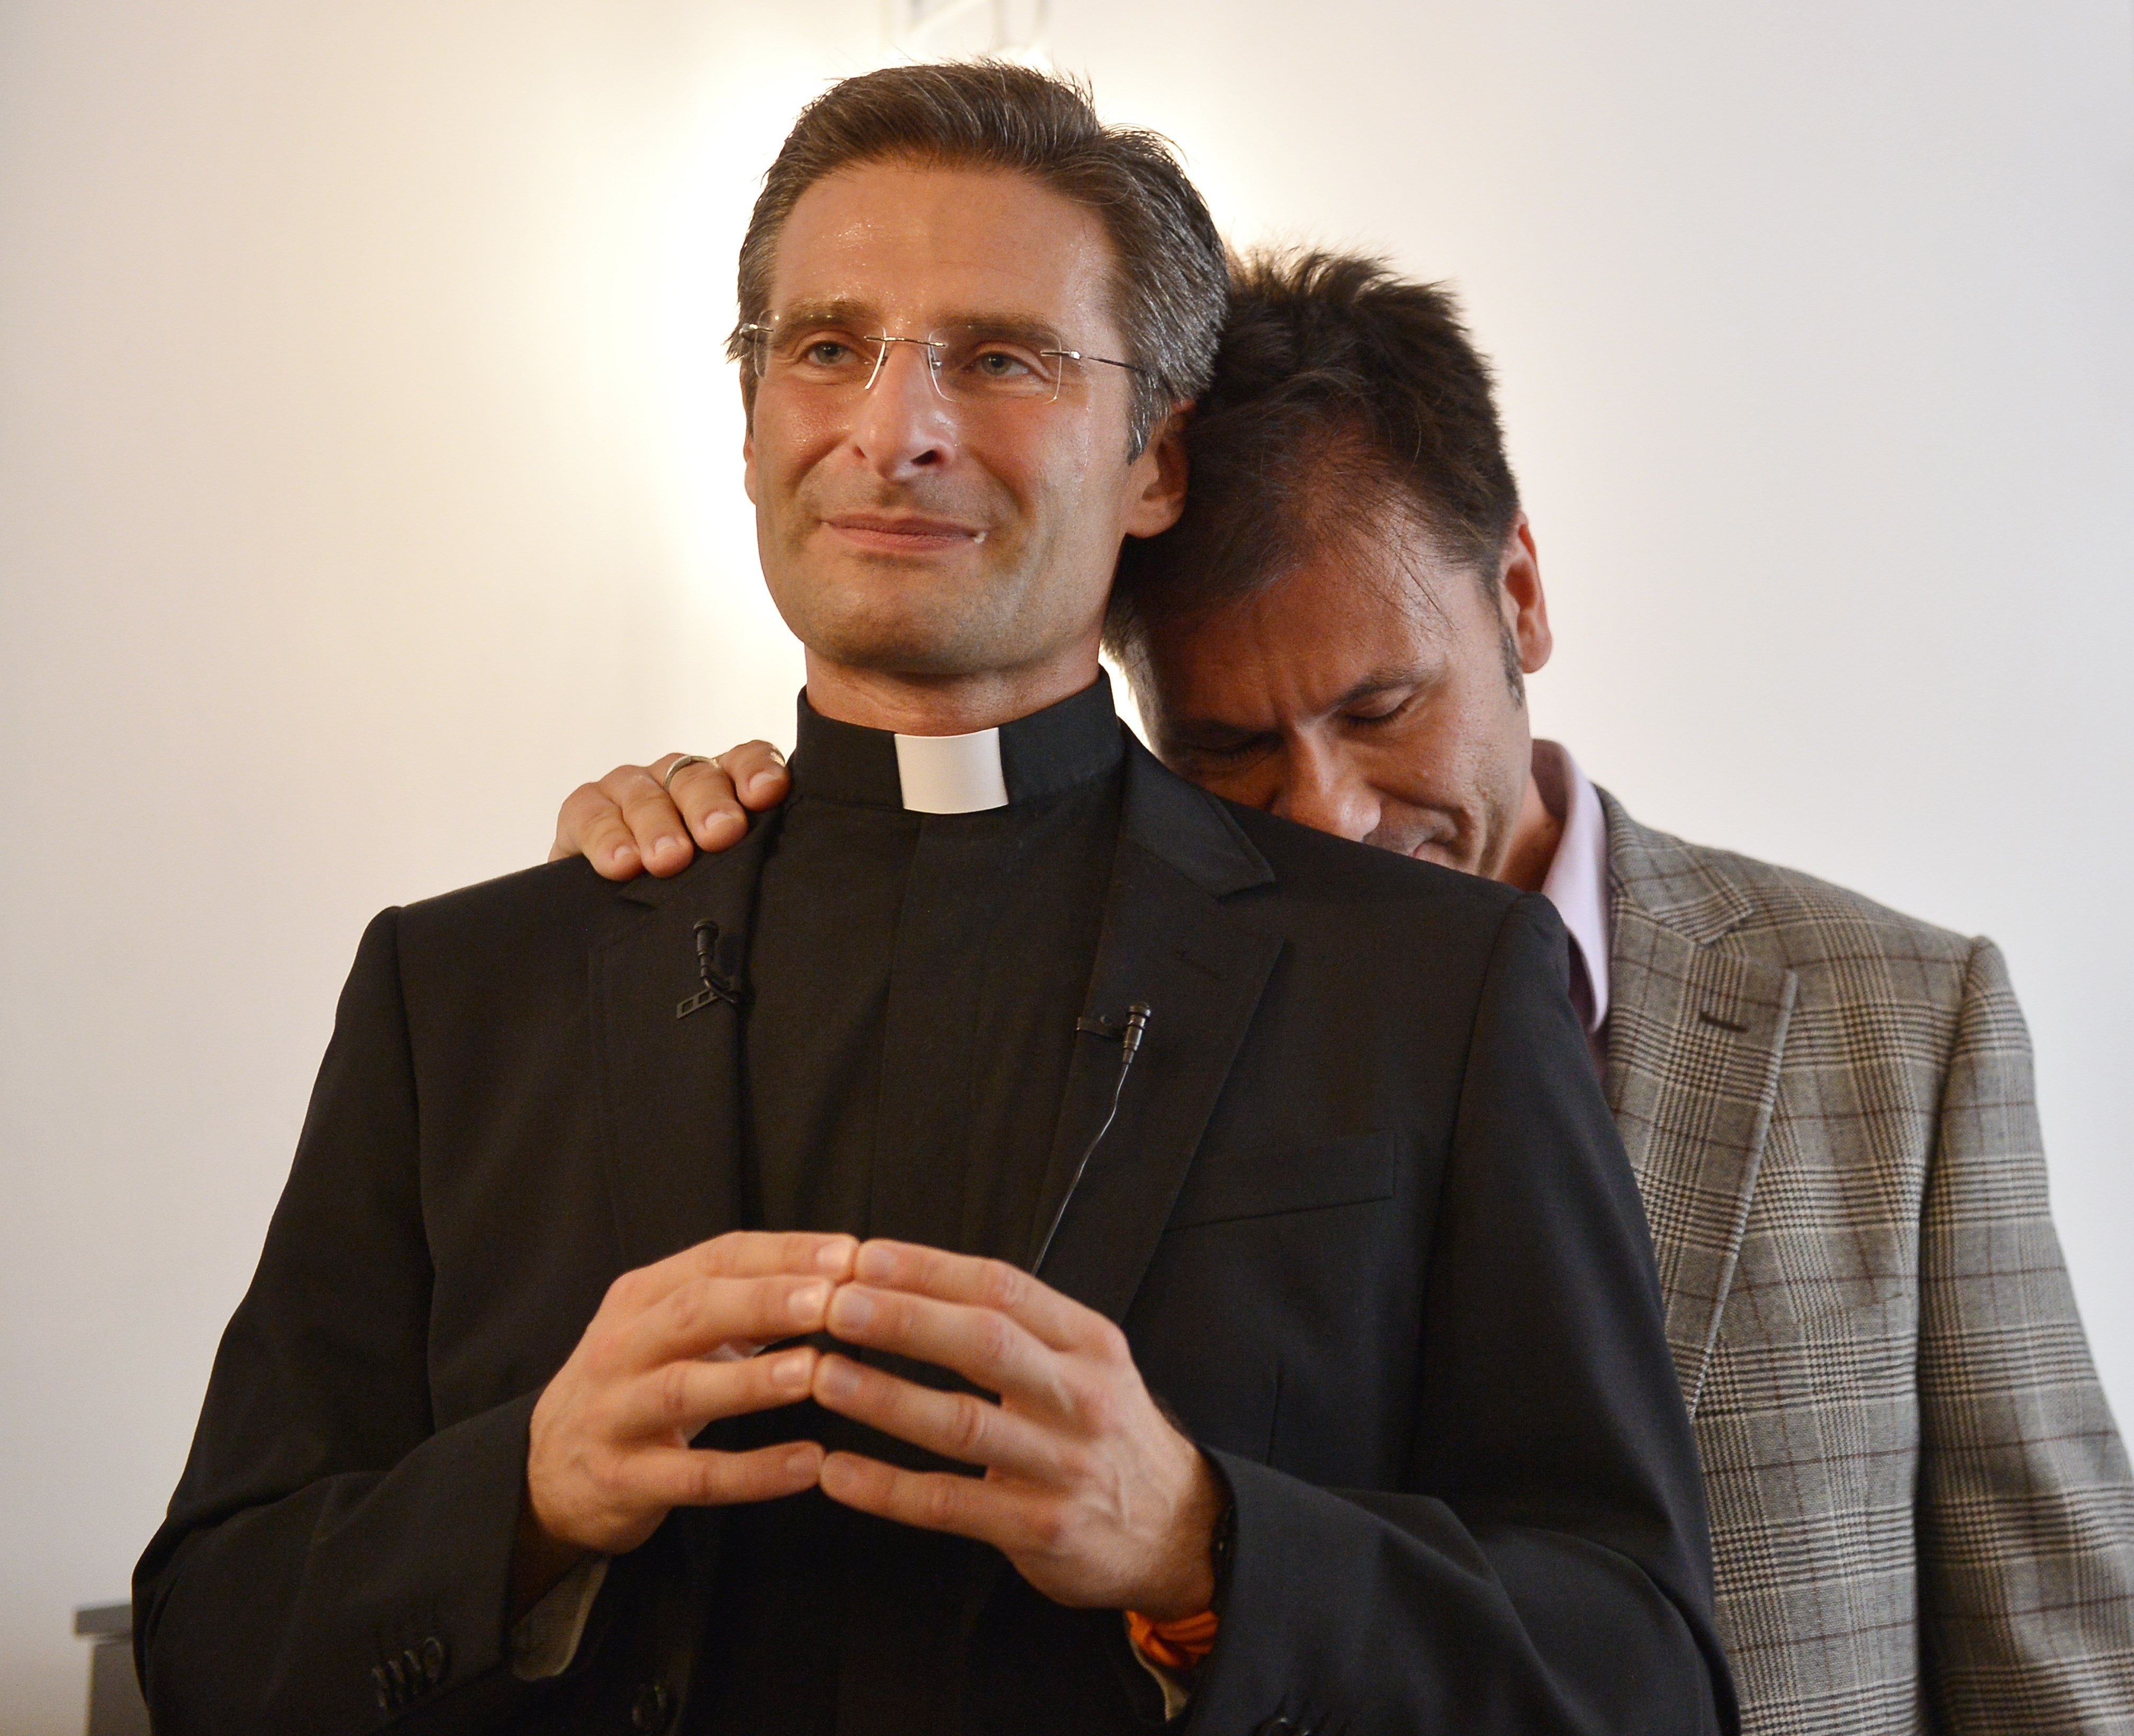 Pope francis's blessing has come too late for this guilty gay catholic